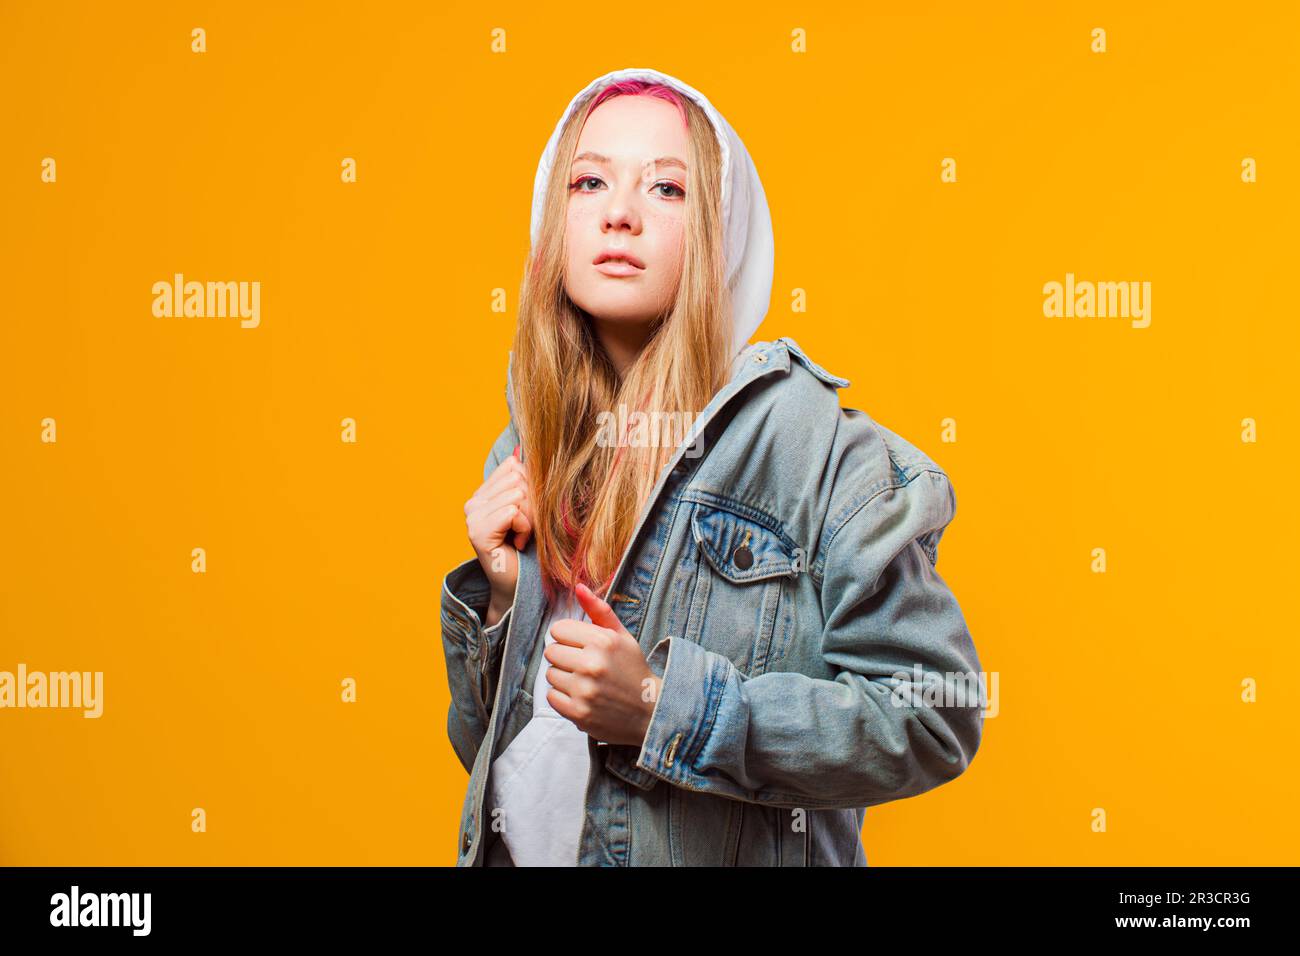 Cool young woman posing in jeans jacket on yellow background Stock Photo